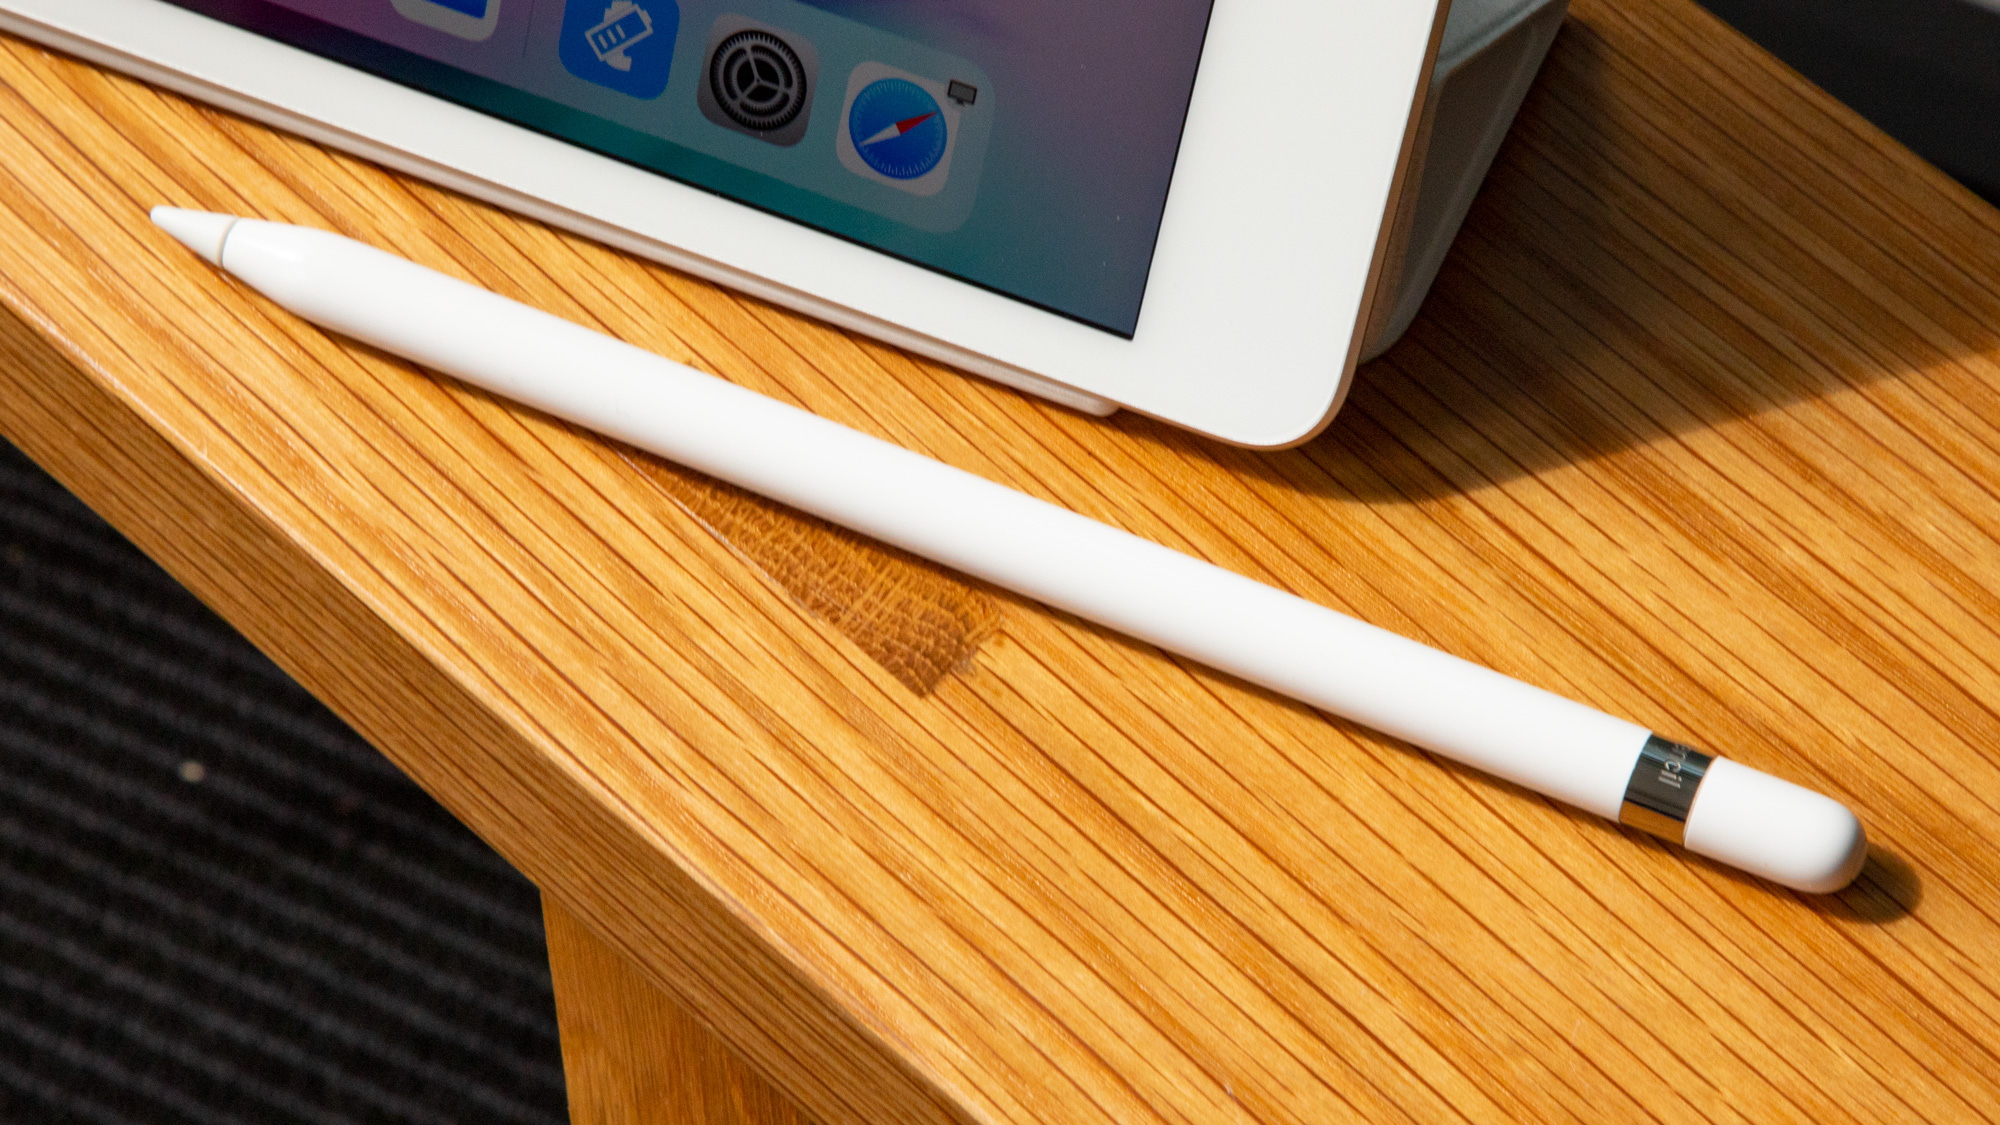 Apple Pencil, specs and battery life iPad mini (2019) review Page 2